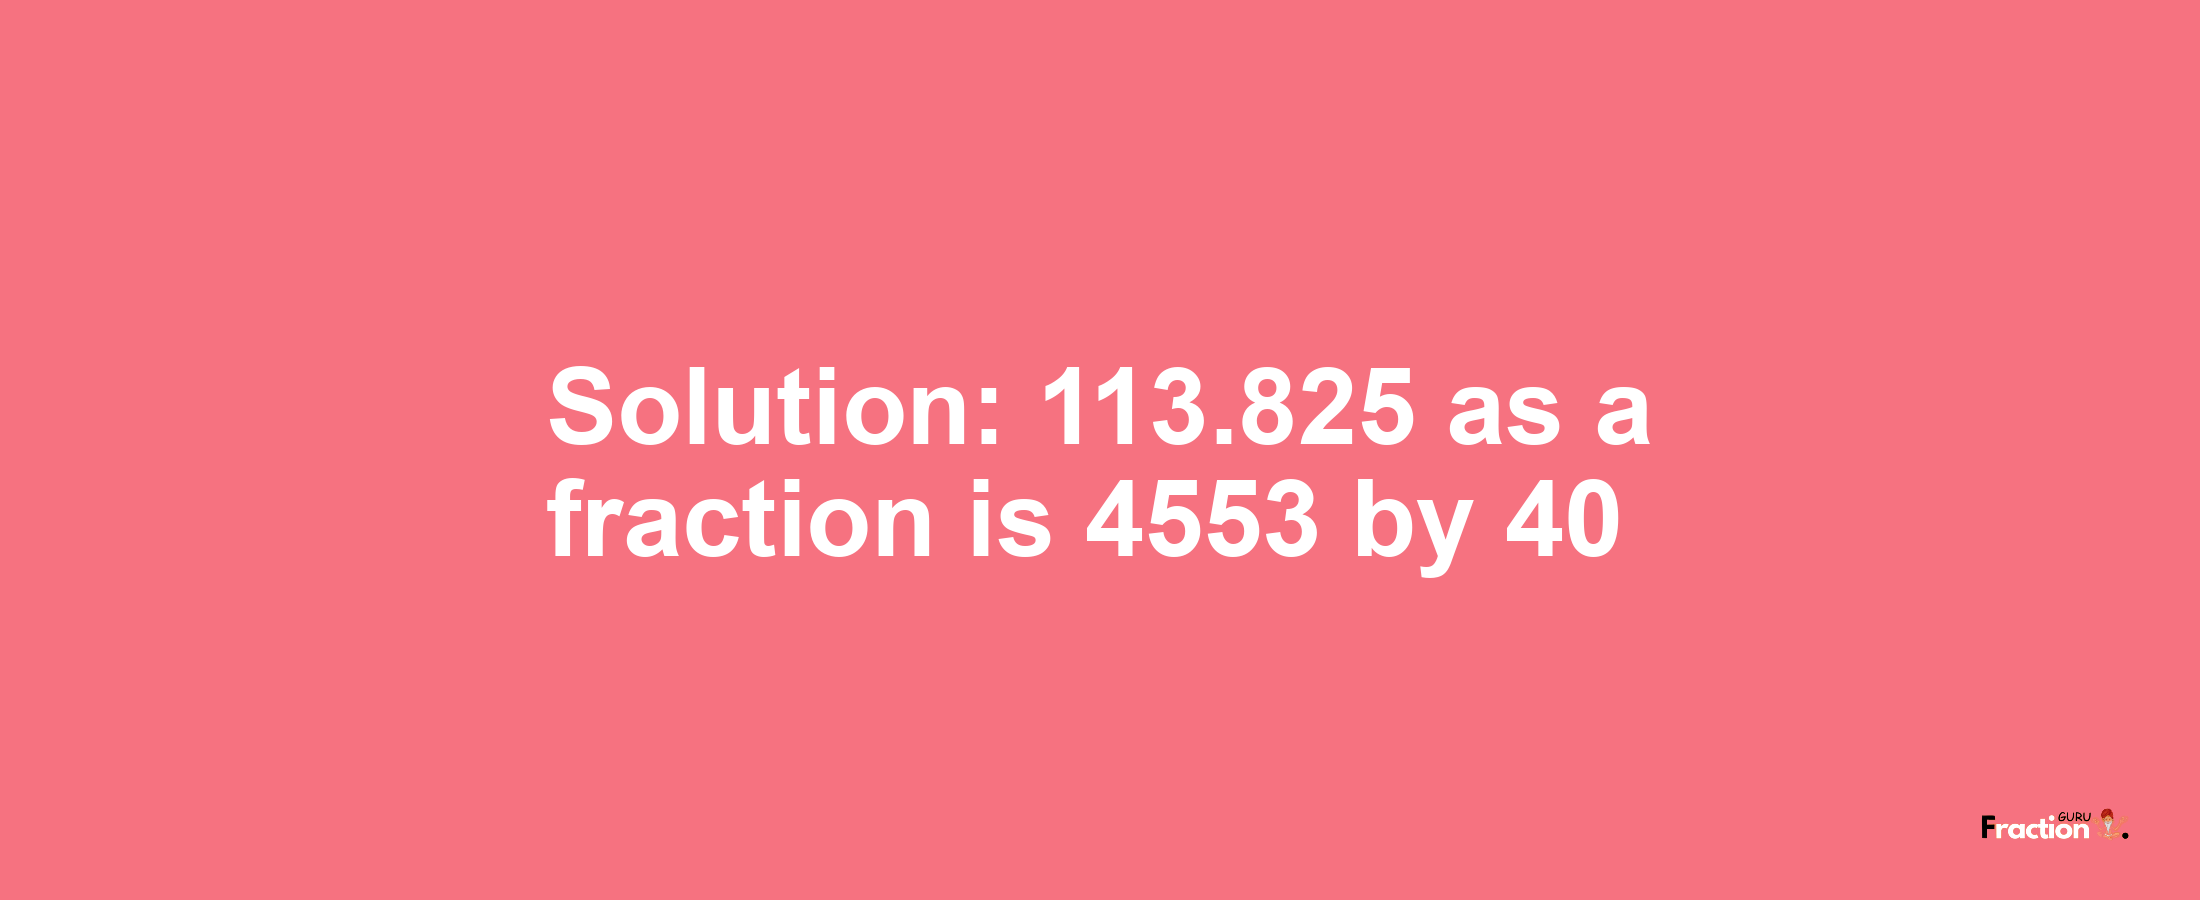 Solution:113.825 as a fraction is 4553/40